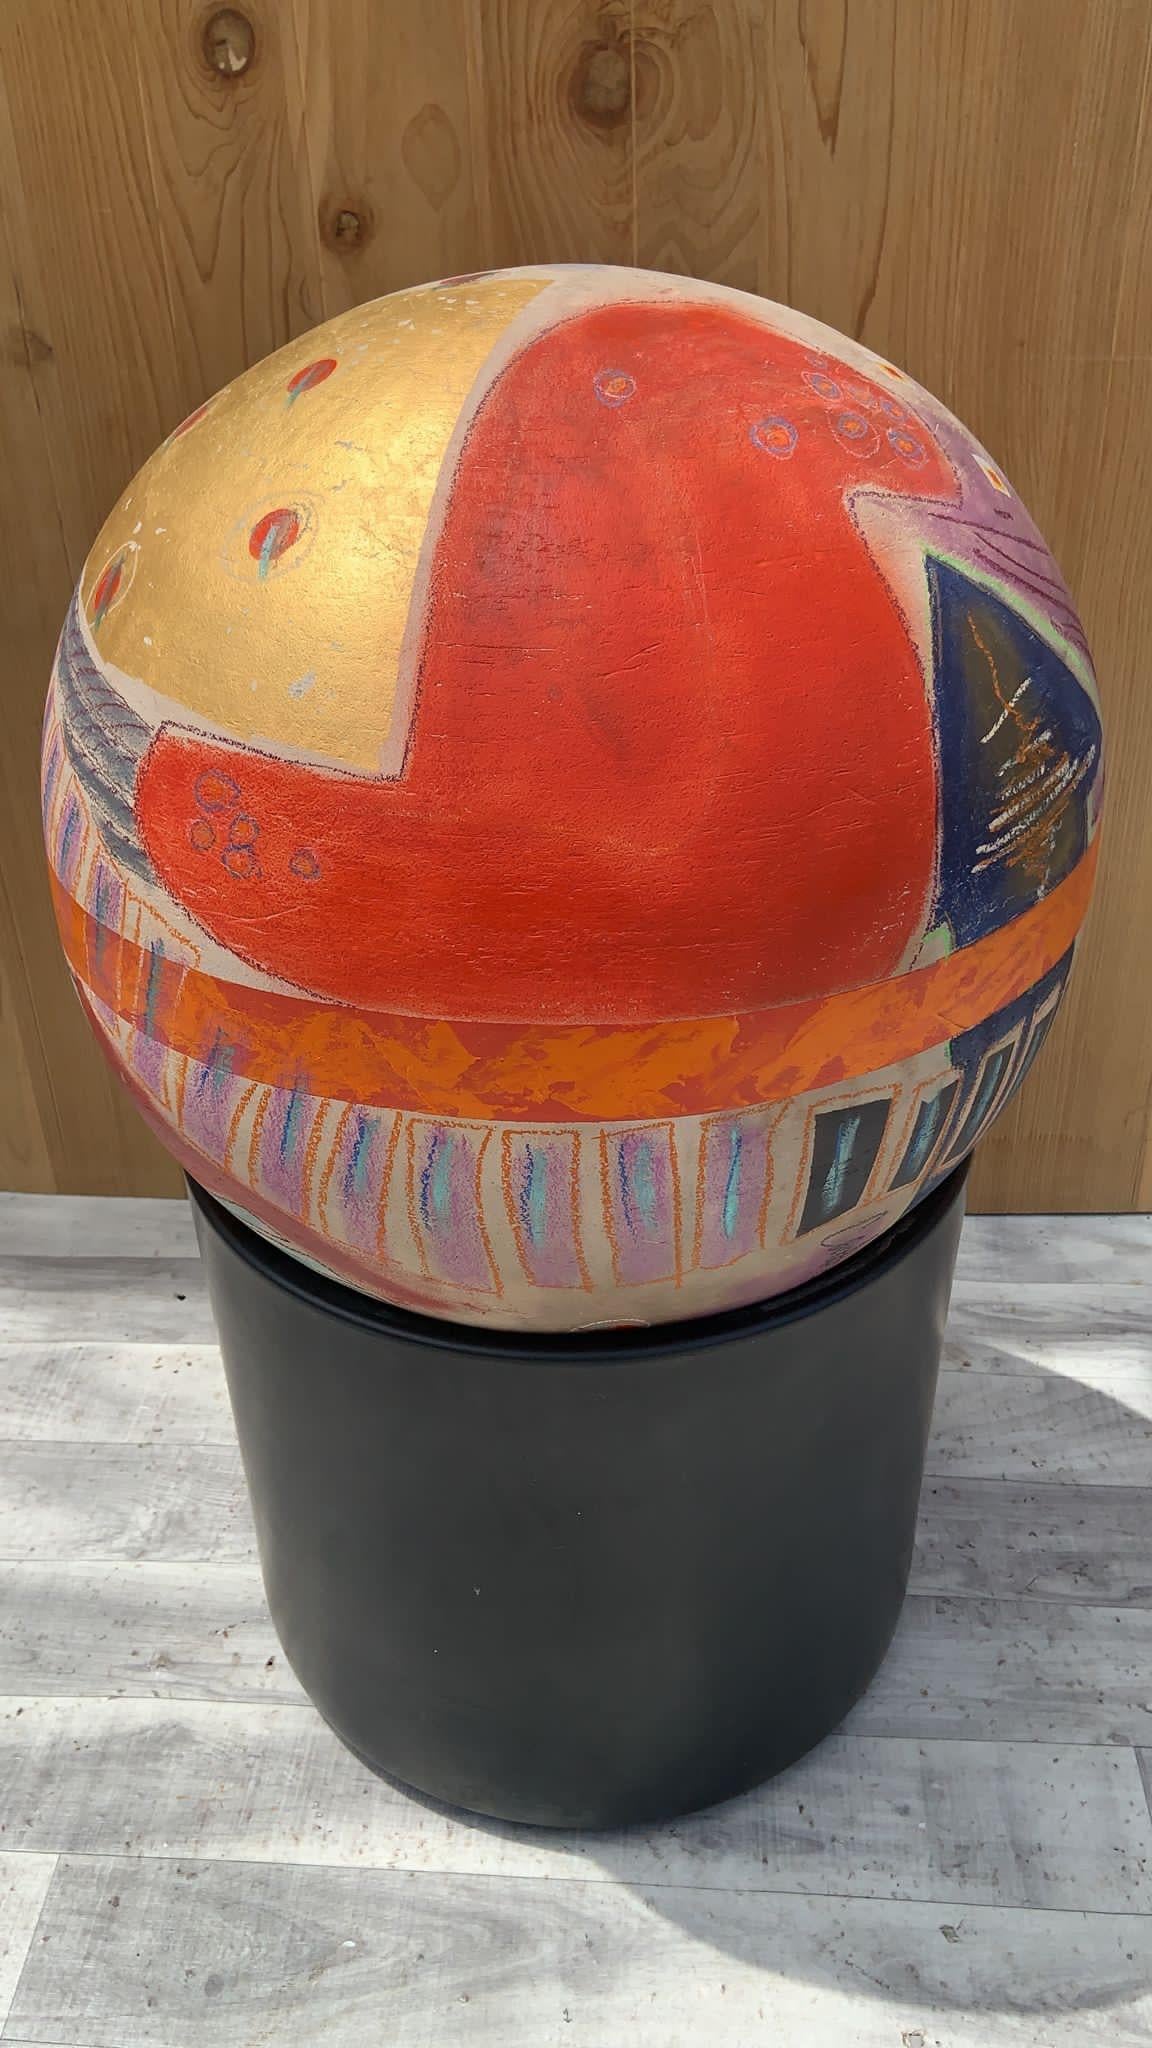 Multi Color Ball Sculpture on a Gainey Ceramics Black Clay Planter - 2 Piece Set In Good Condition For Sale In Chicago, IL